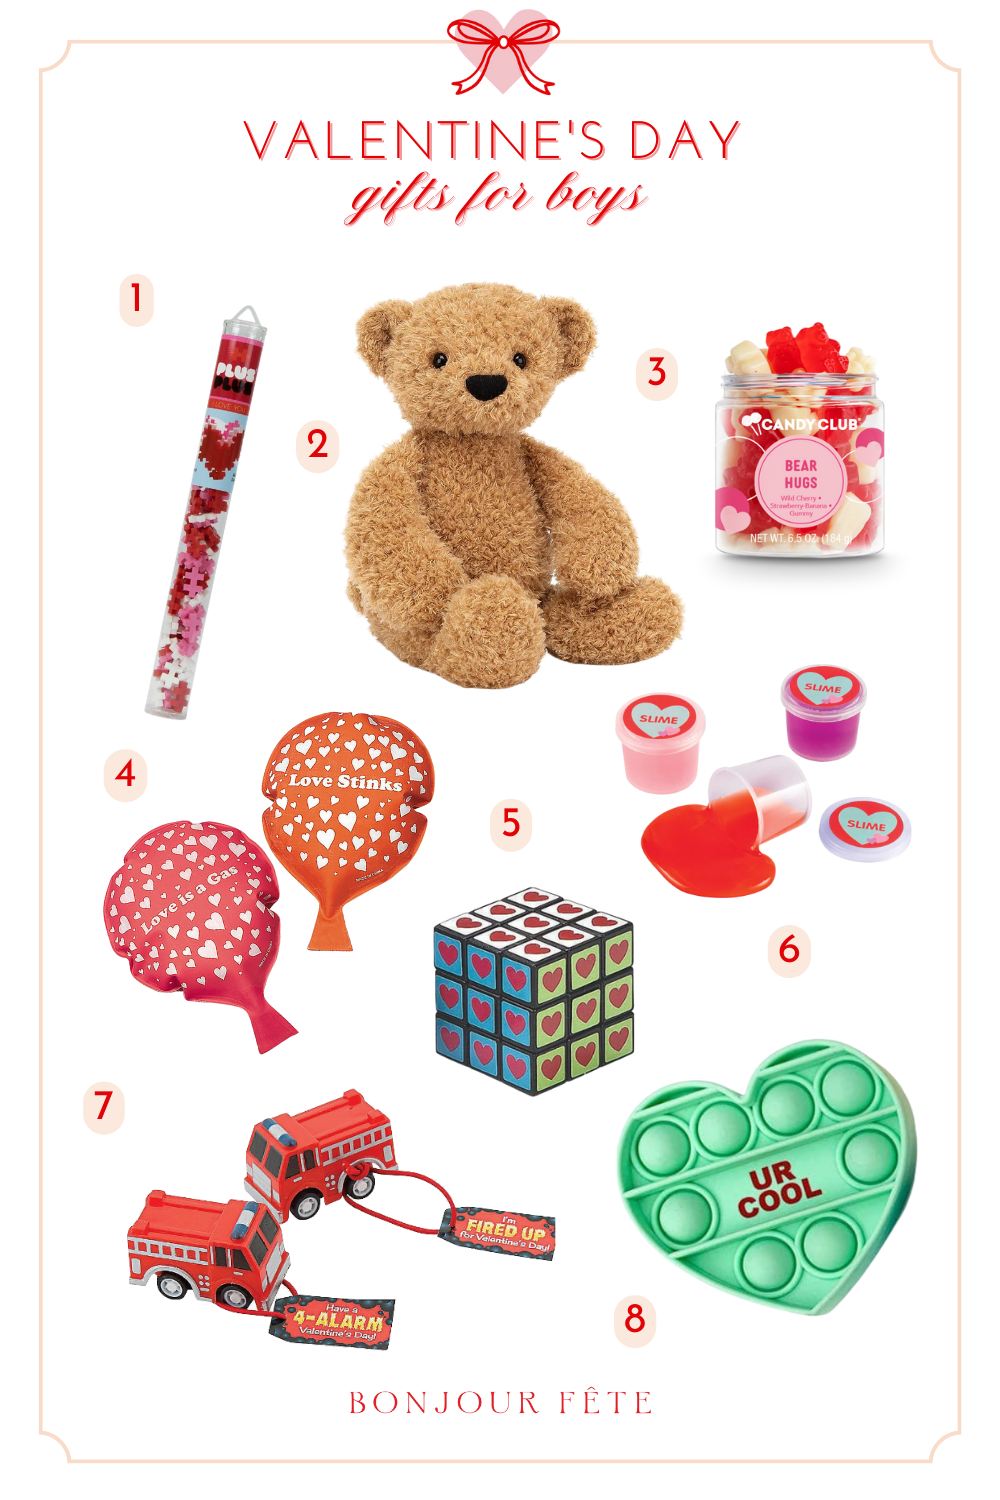 Valentine's Day gifts for boys.